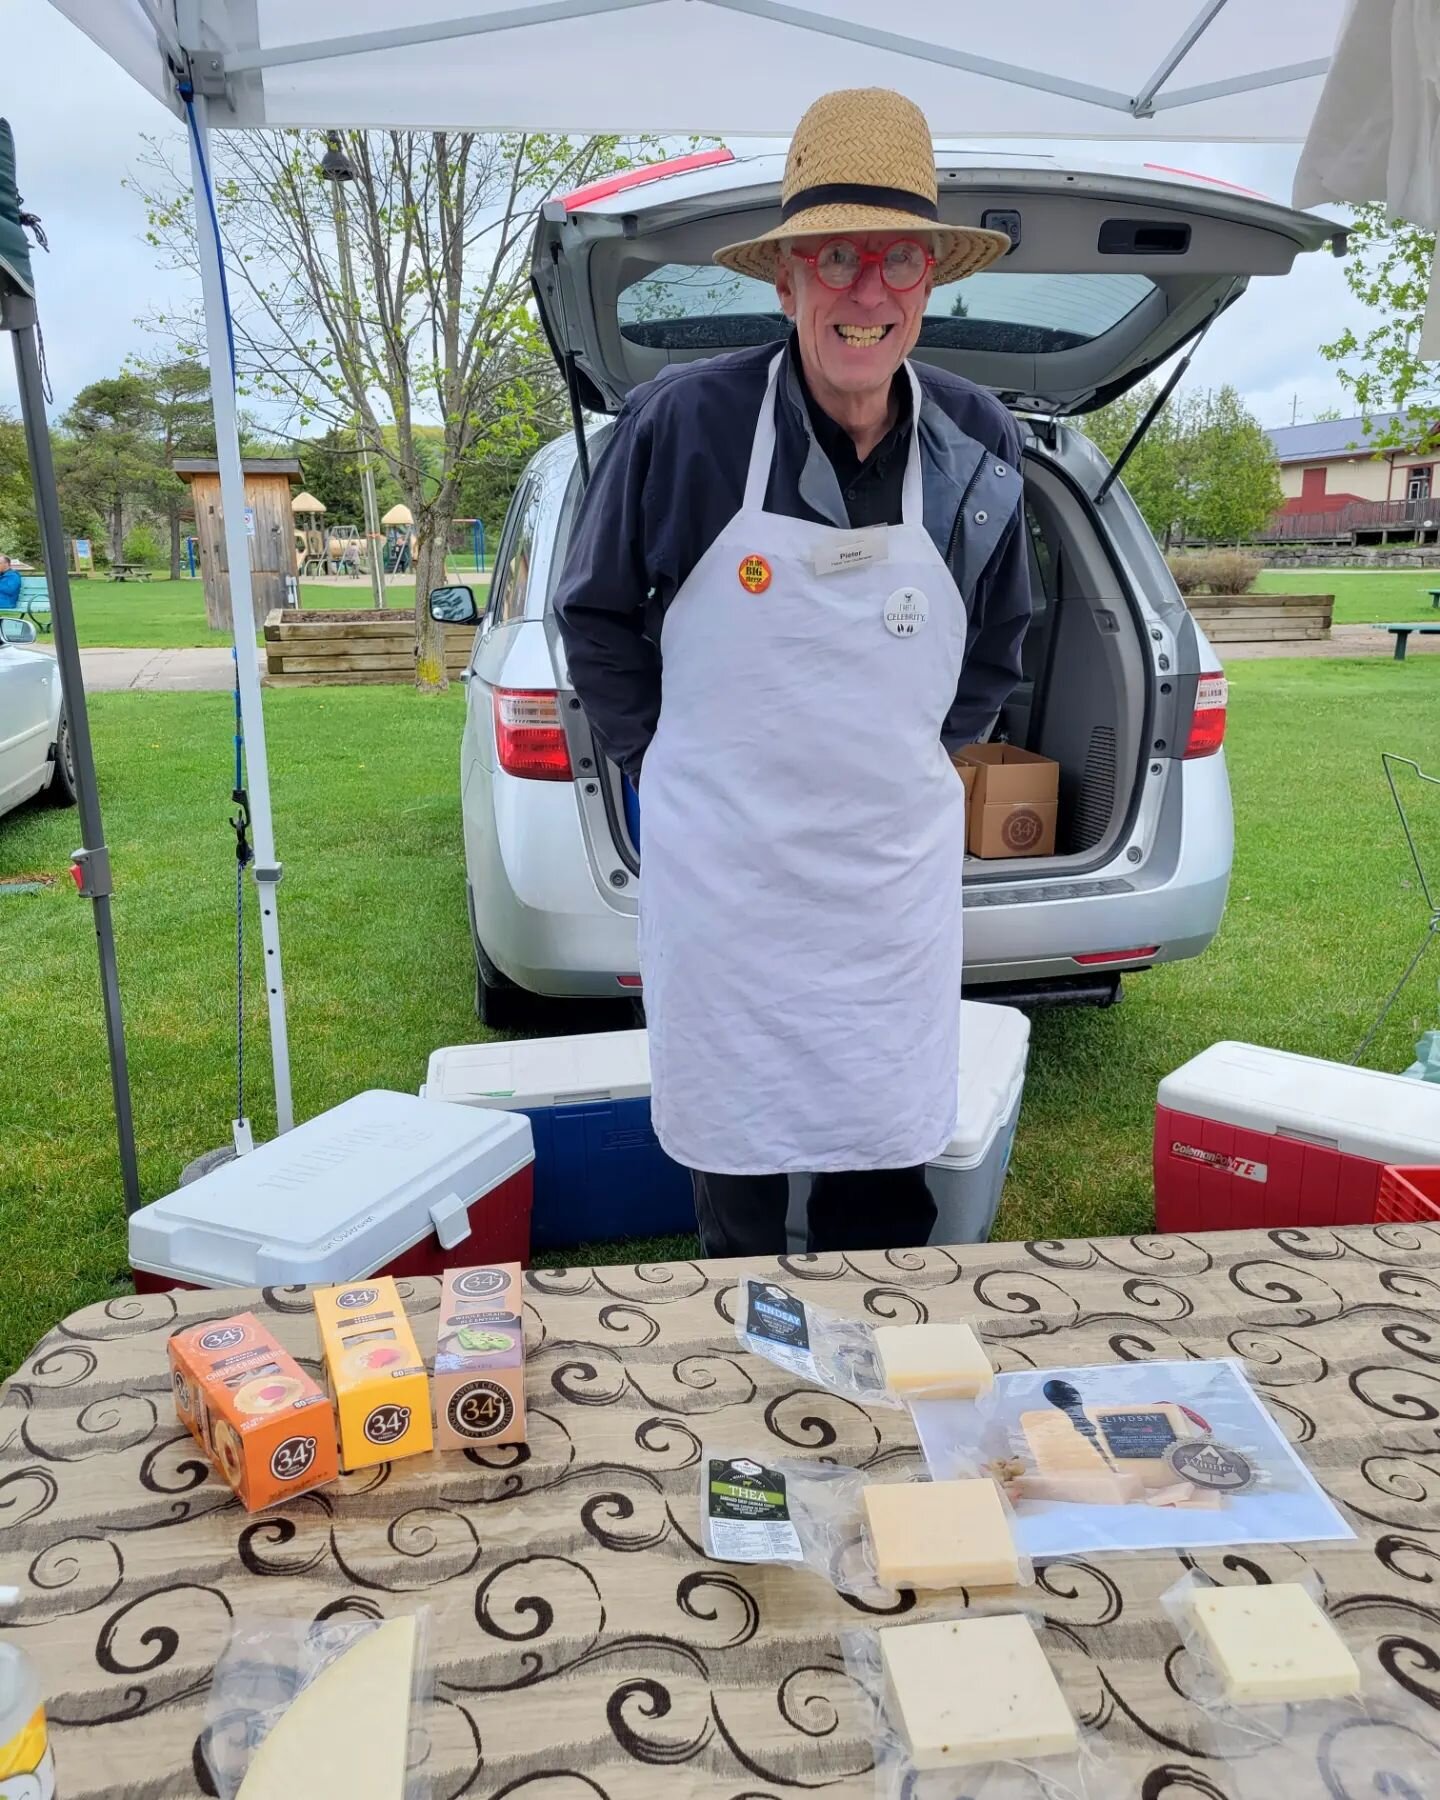 Cheese? YES PLEASE! This is Pieter, he sells cheese at the Haliburton Farmers' Market on Tuesdays! And it's the best goat and sheep cheese ever!
.
.
.
#eatcheese #cheeseplease #myfarmersmarket #myhaliburtonhighlands #eatlocalthinkglobal #tuesdaysaref